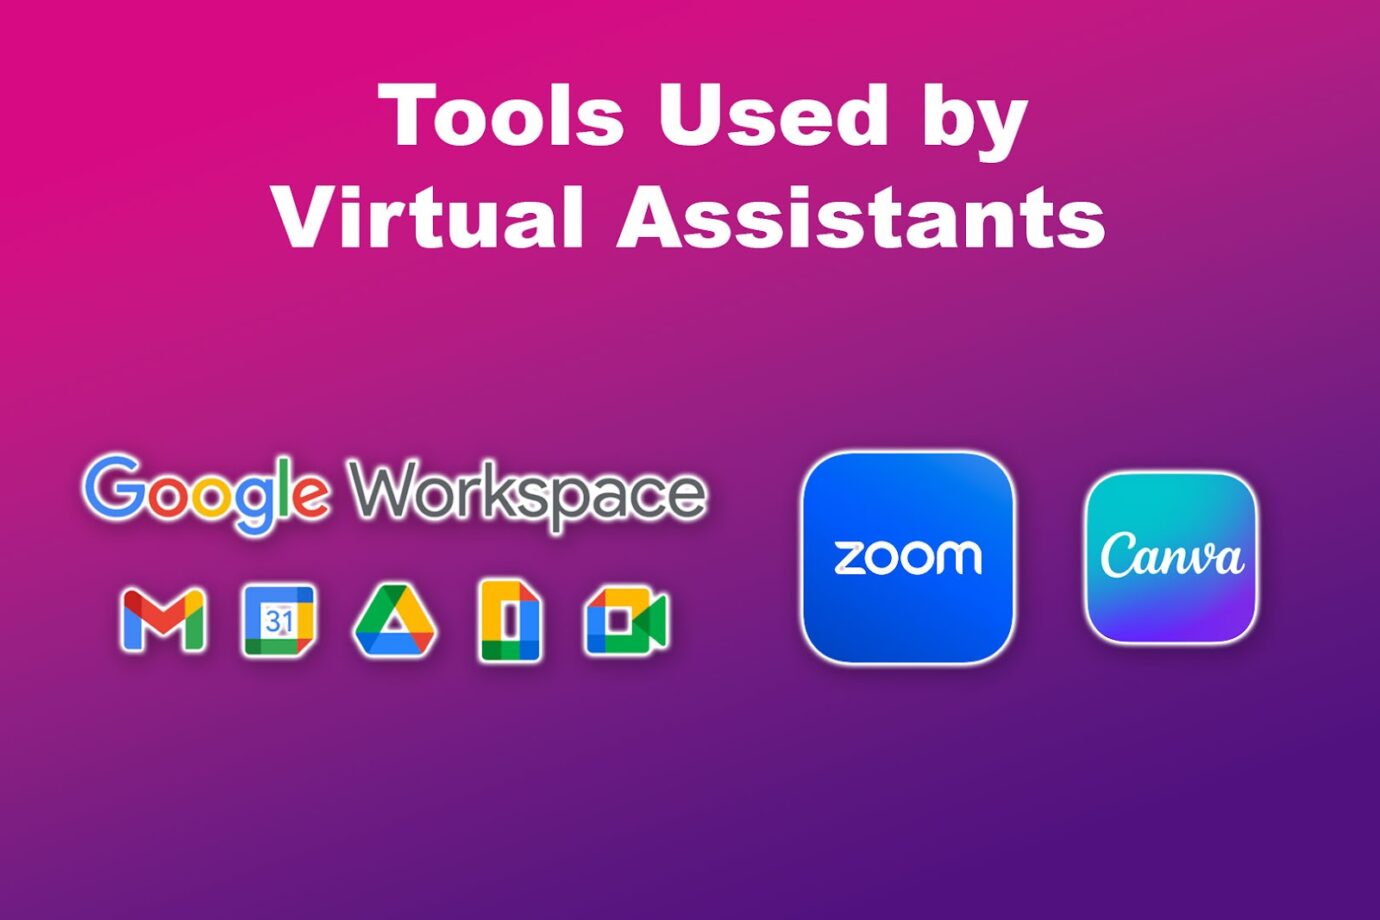 Tools Used by Virtual Assistants